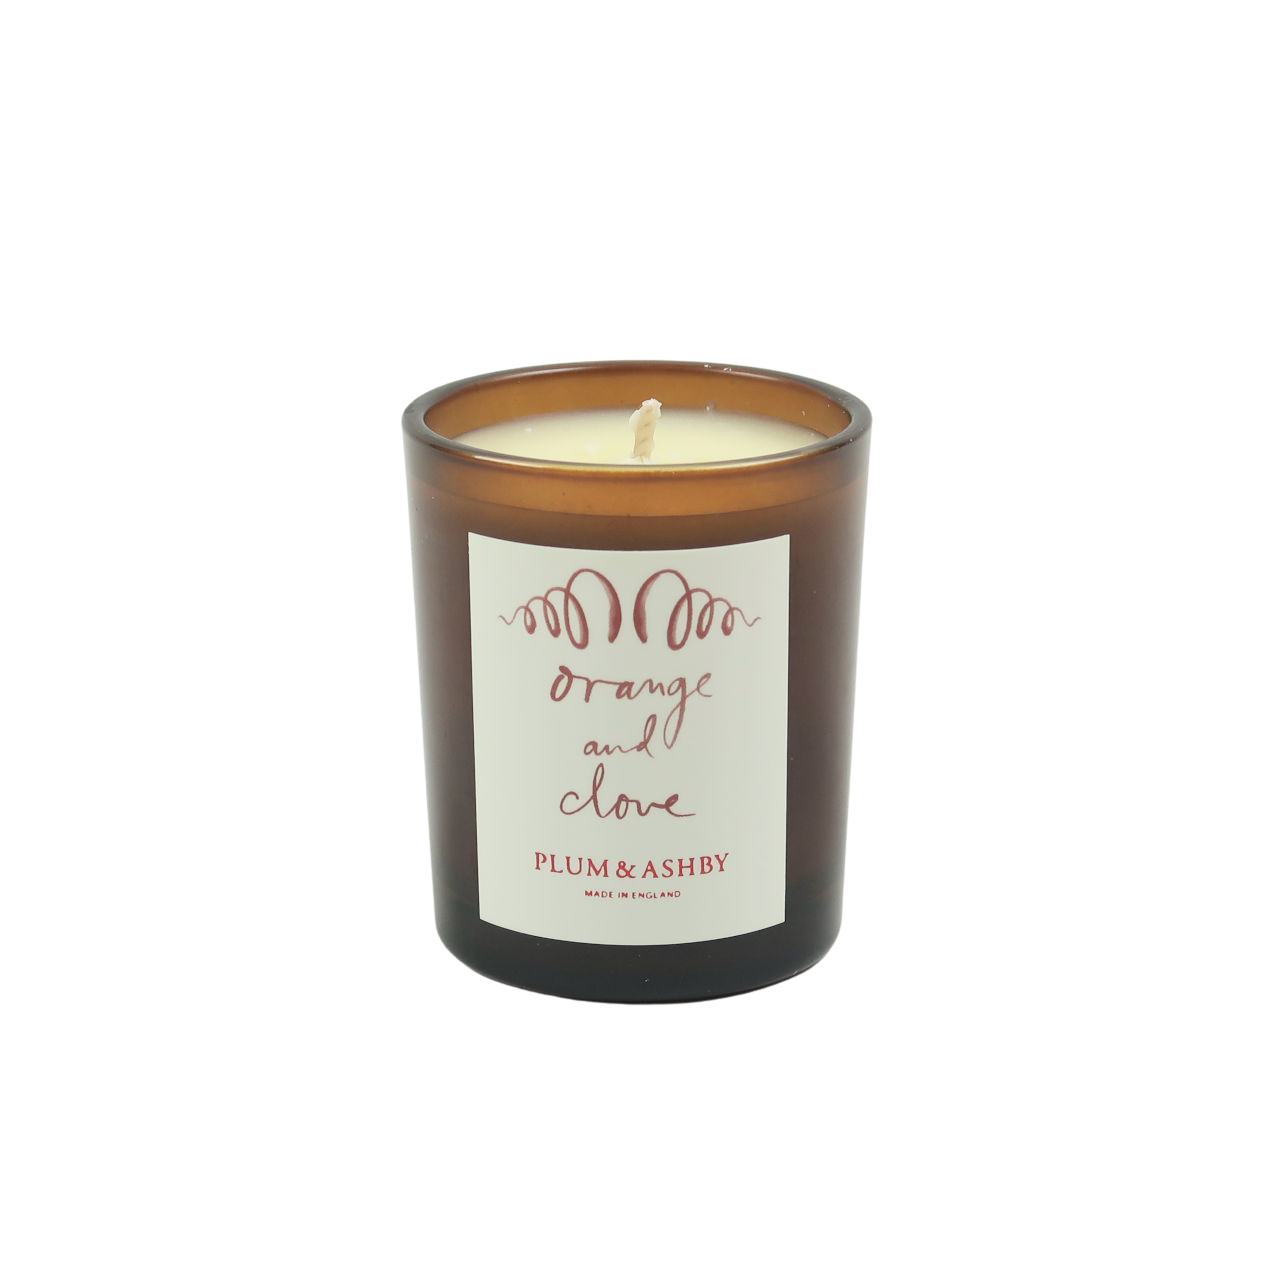 Plum + Ashby Orange & Clove Scented Candle - Small